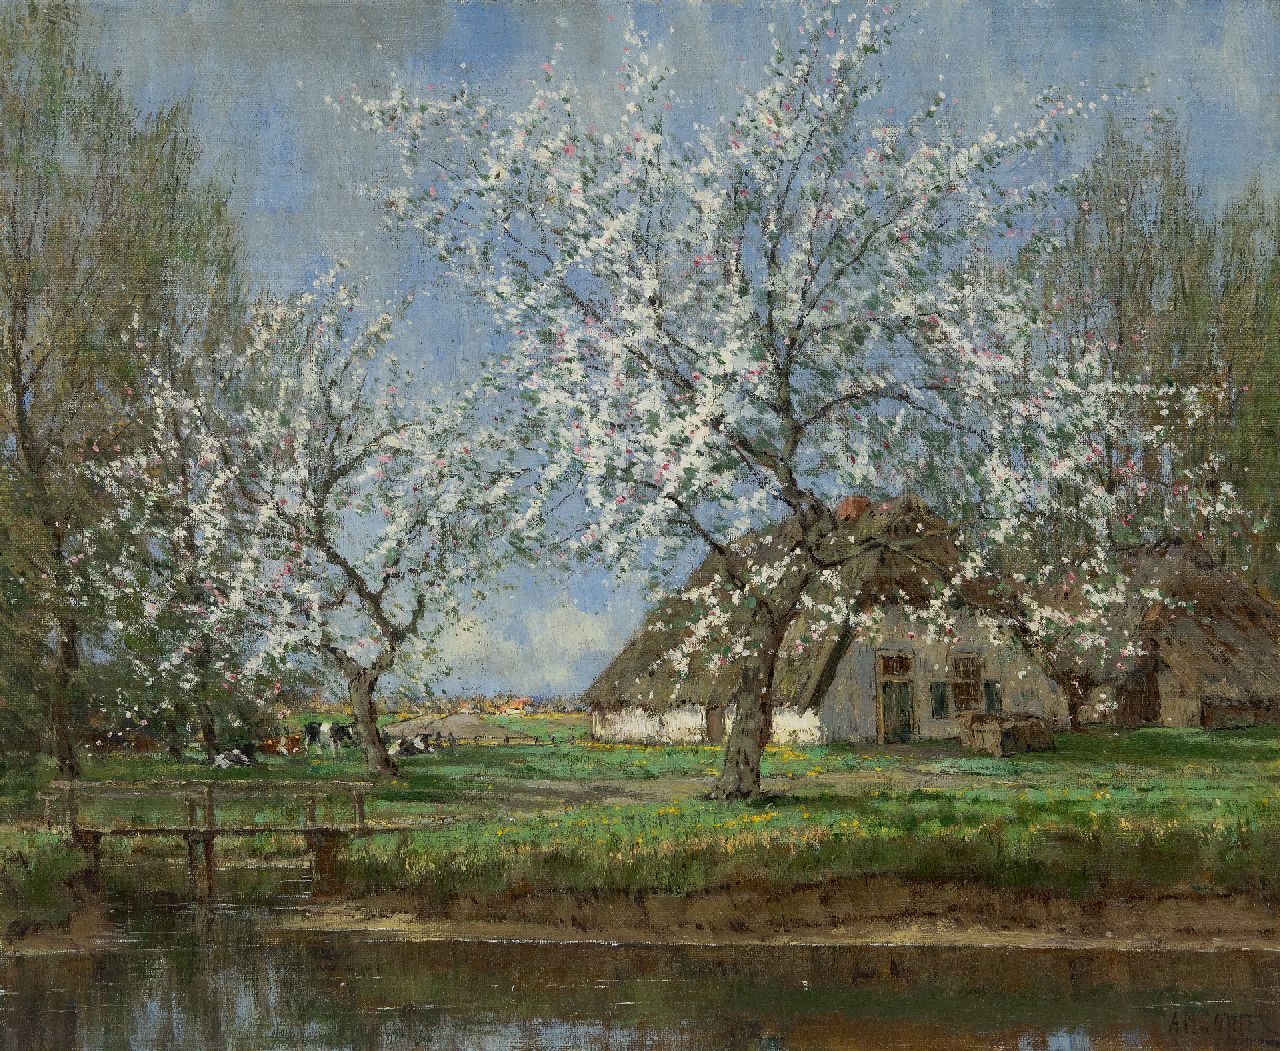 Gorter A.M.  | 'Arnold' Marc Gorter, Spring blossom, oil on canvas 46.3 x 56.3 cm, signed l.r.